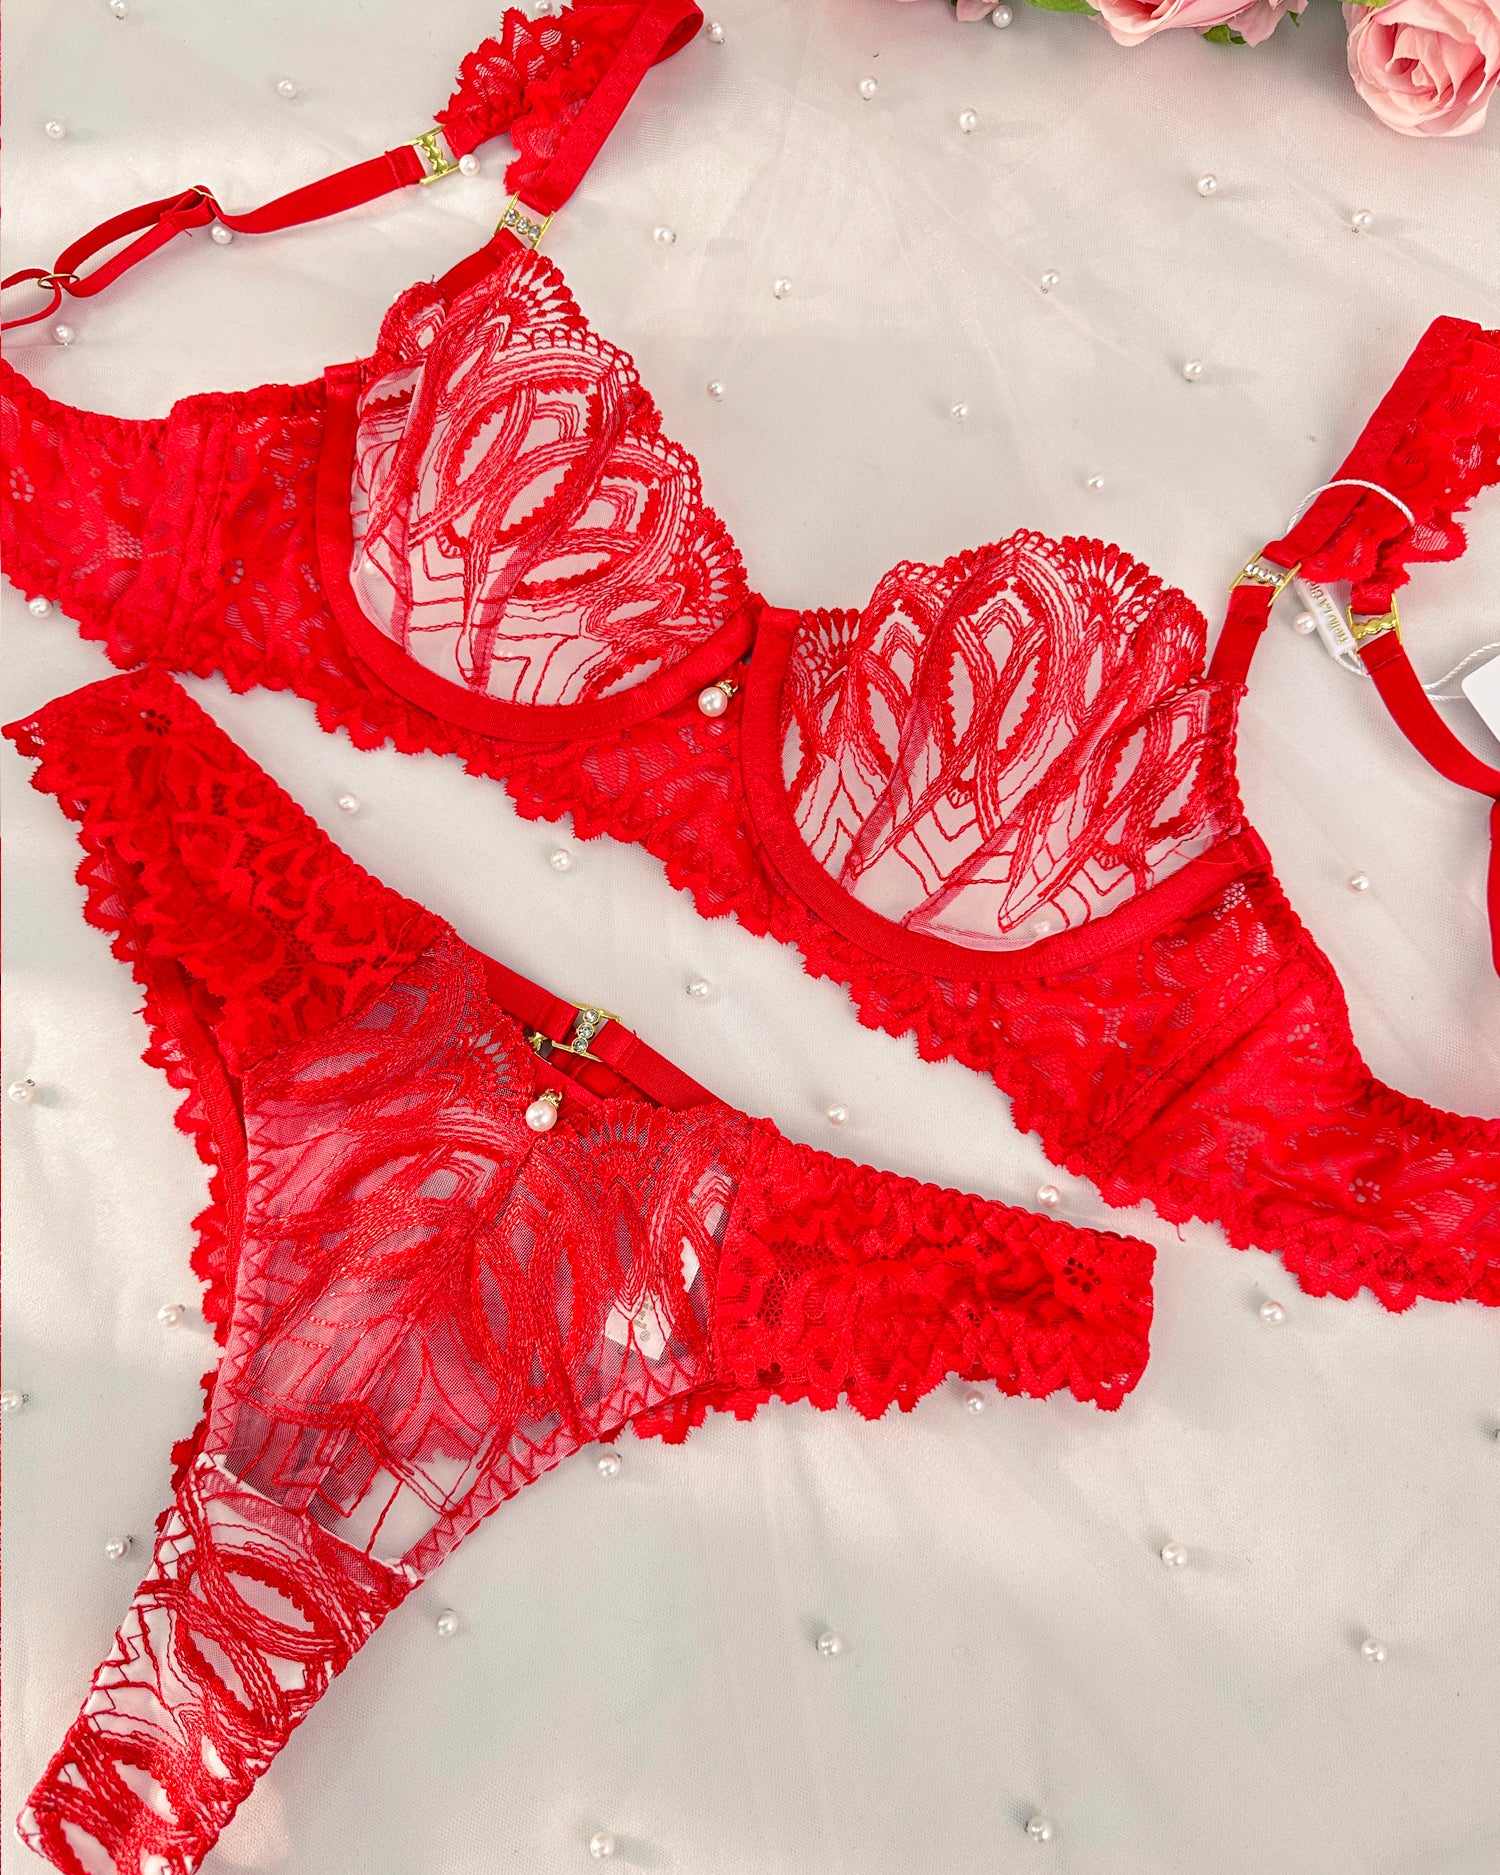 Eye-catching Red Embroidered Small Pearl Lingerie Set